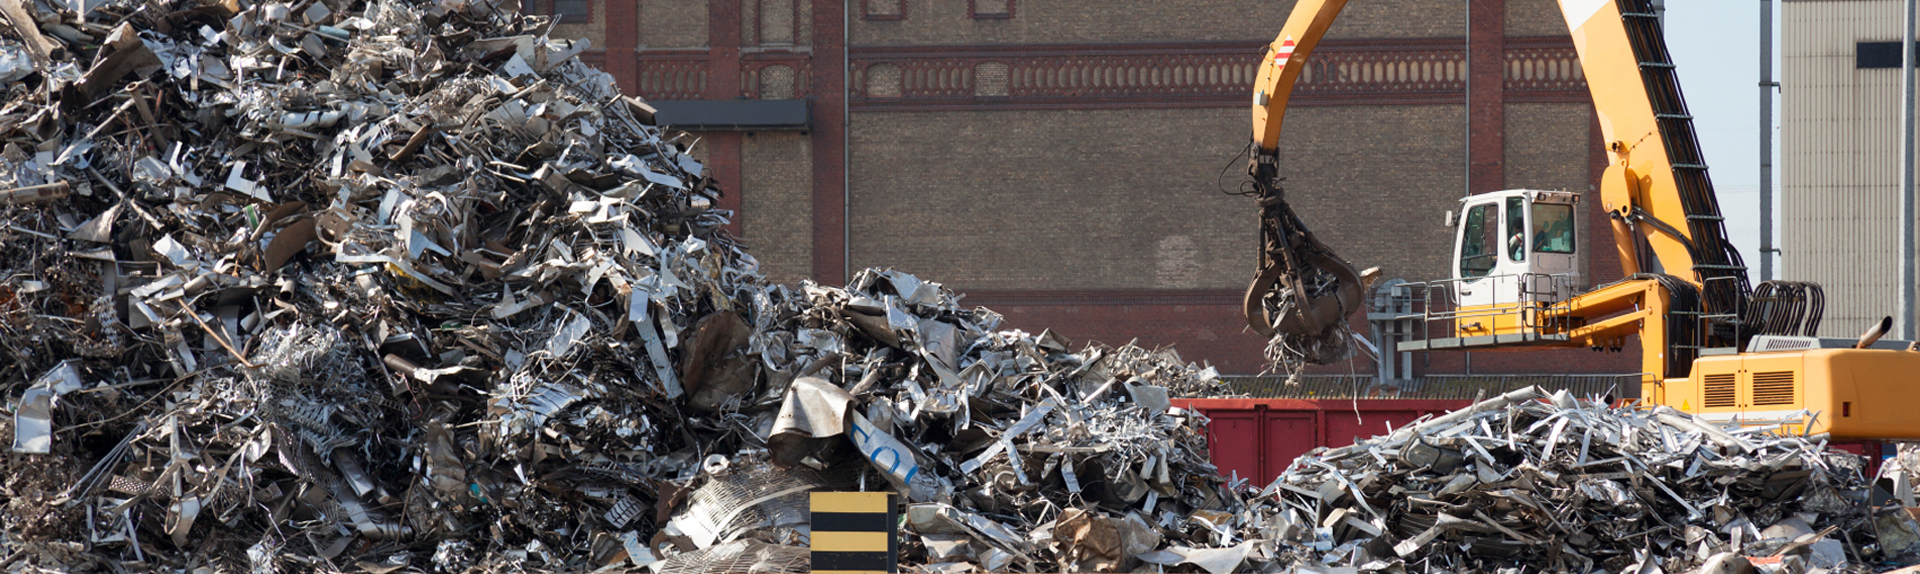 largest scrap metal recycling companies